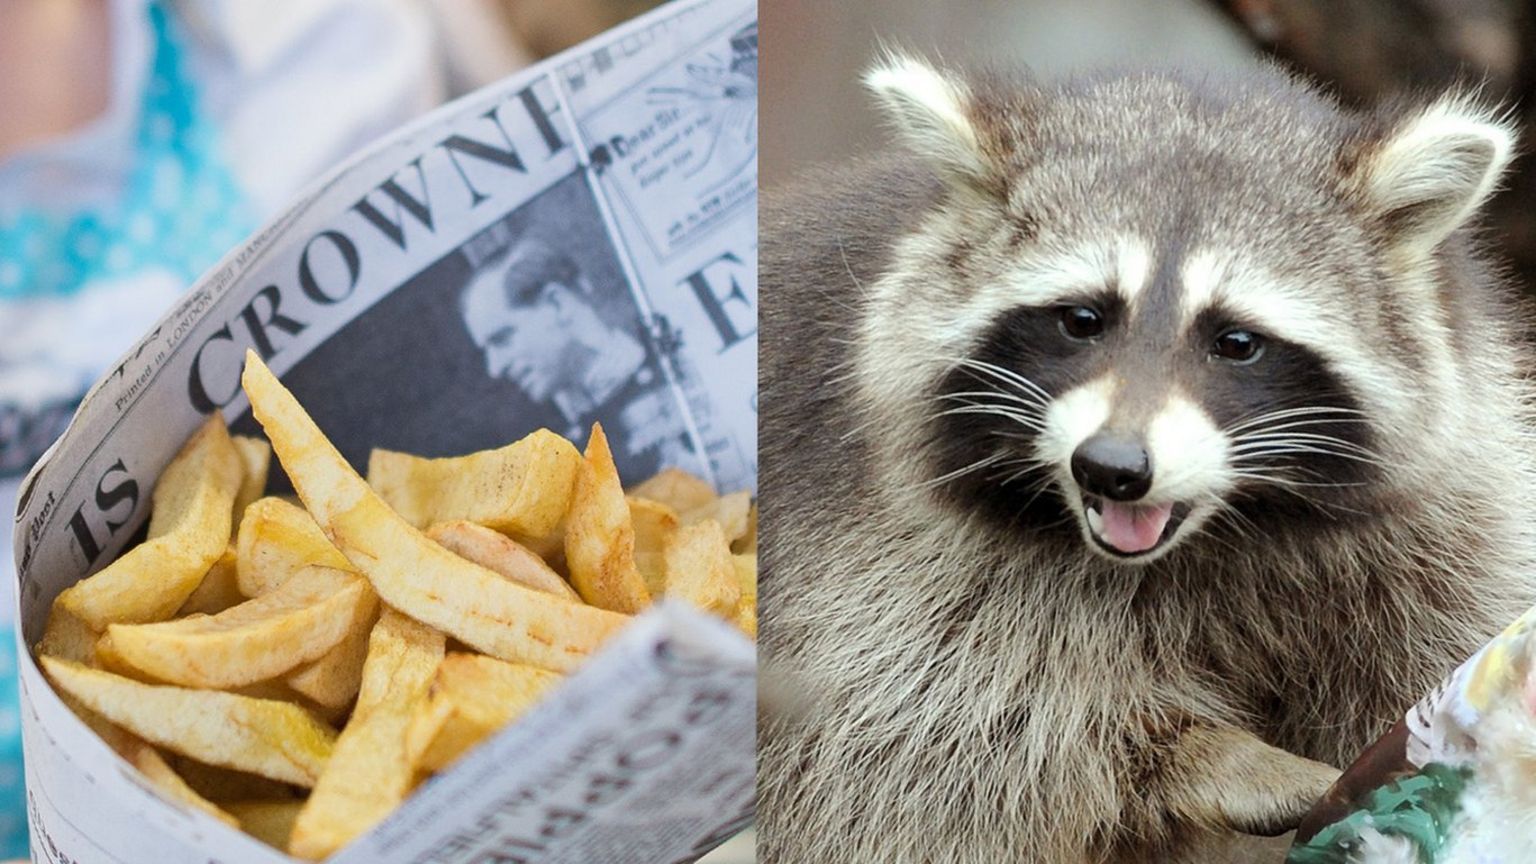 Chips wrapped in newspaper and a raccoon.